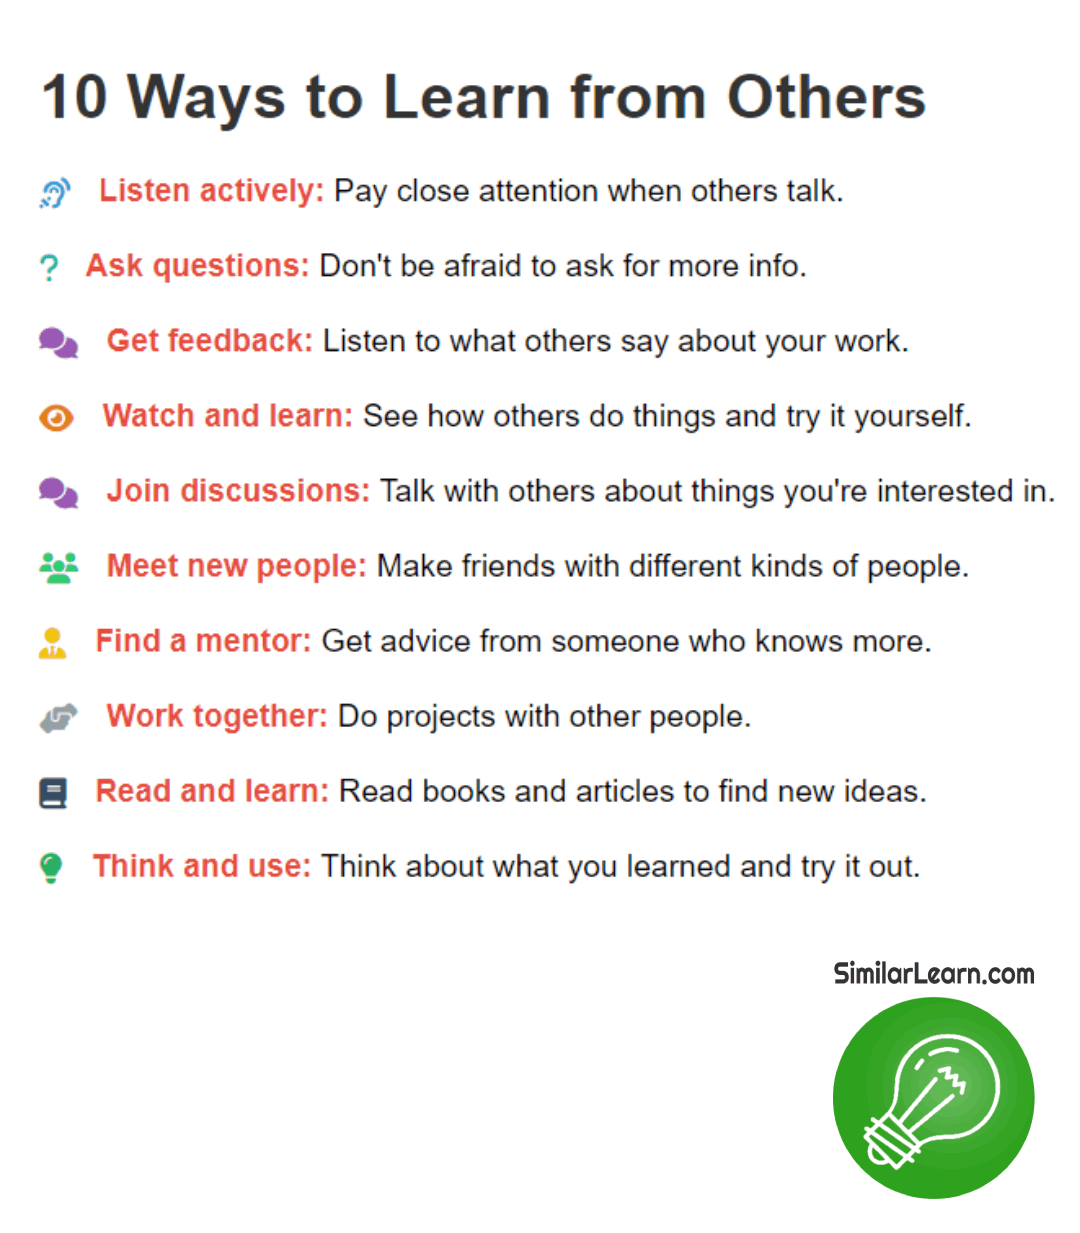 10 ways to learn from others